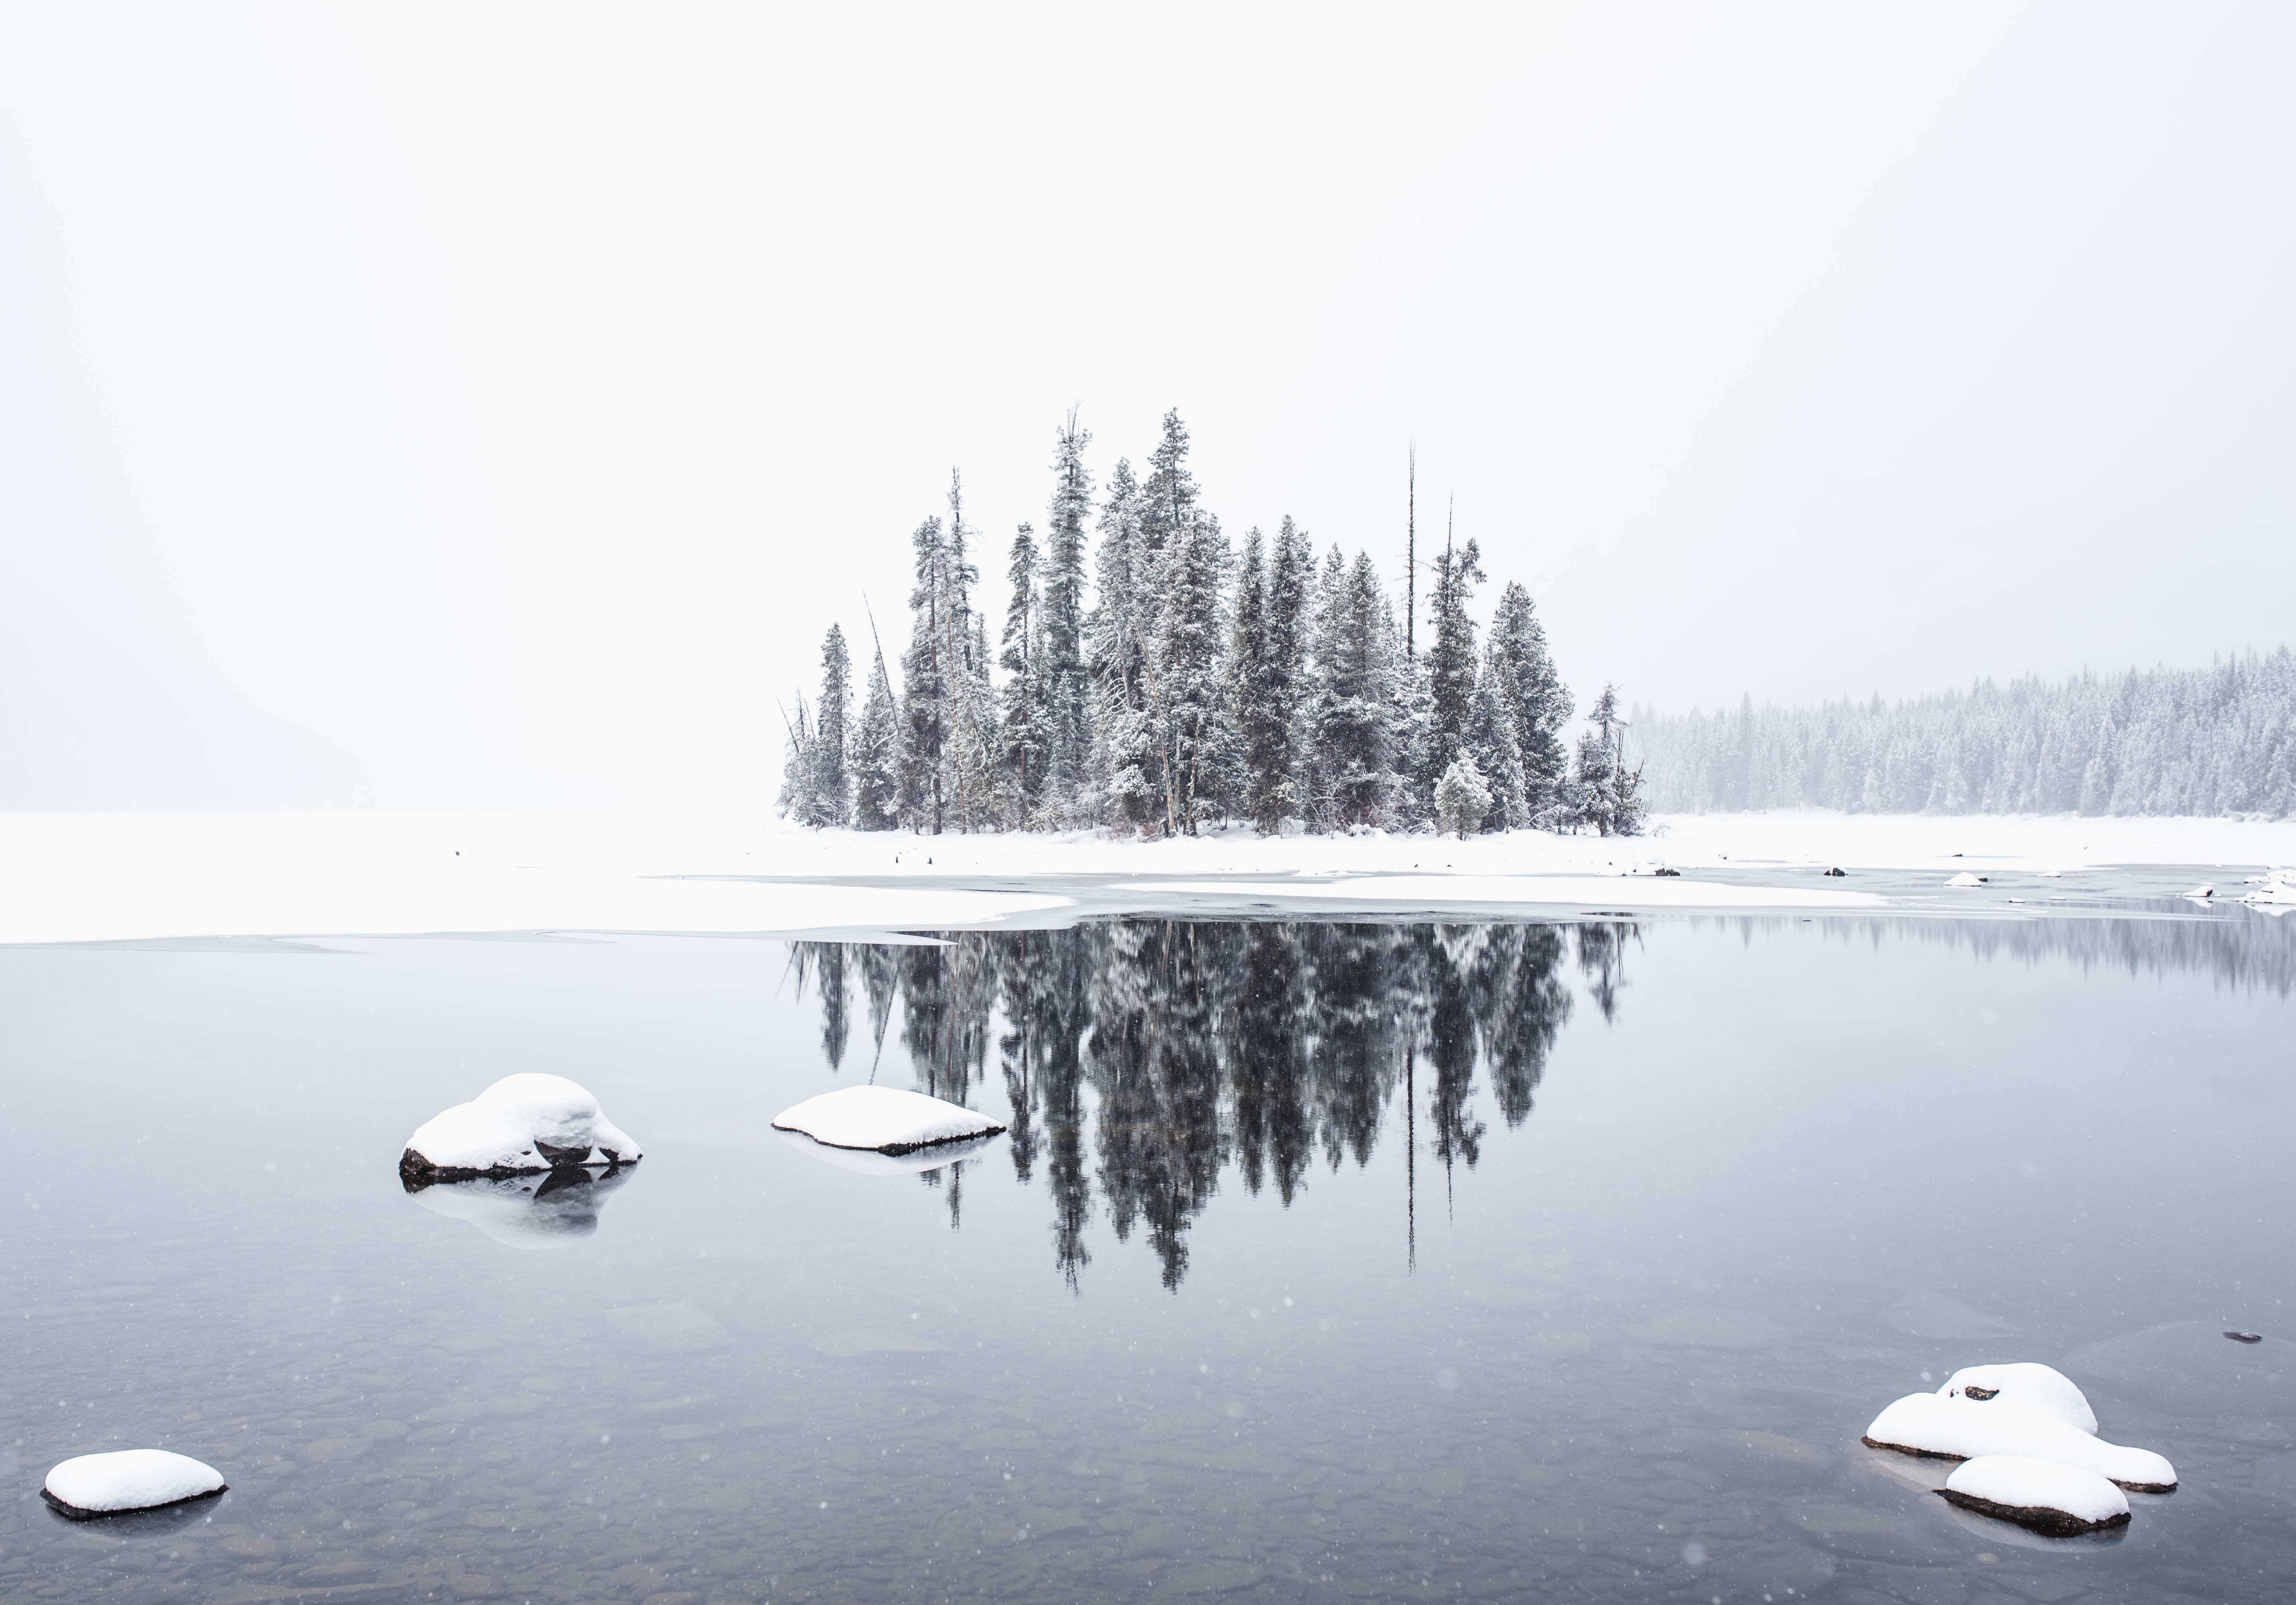 5744x4016 white, pine tree, lake, island, snow, water, tree, cloud, ice, cold, frozen, Free image, rock, reflection, trees